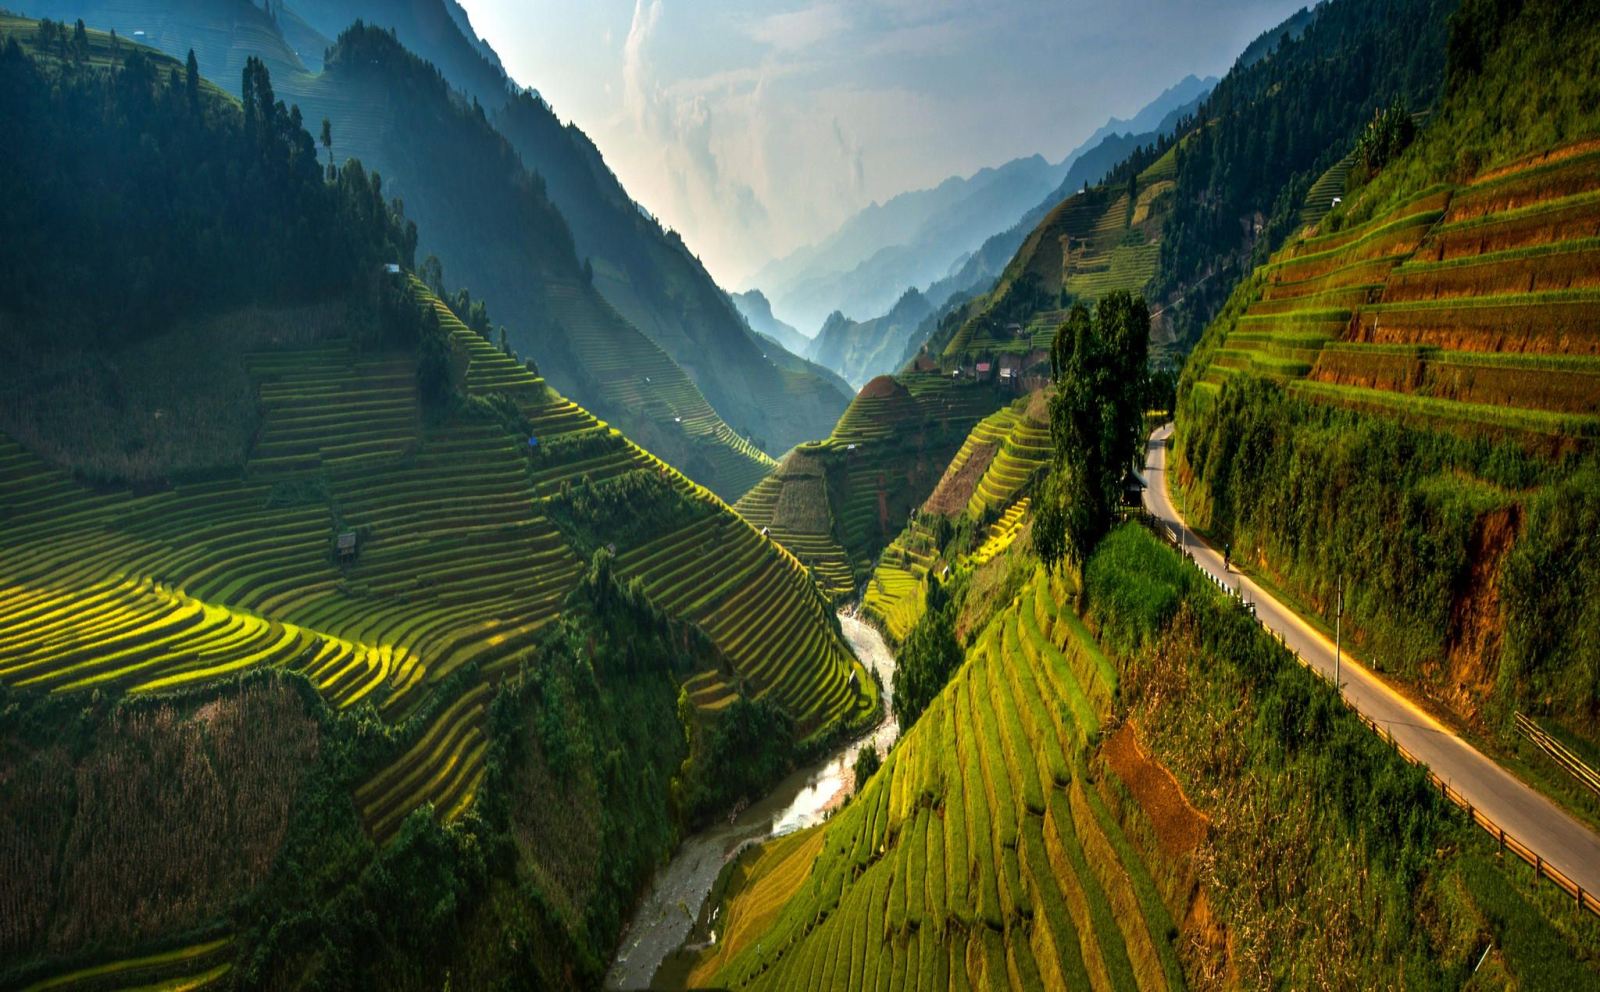 Sapa and Halong tours 6 days exclusive 